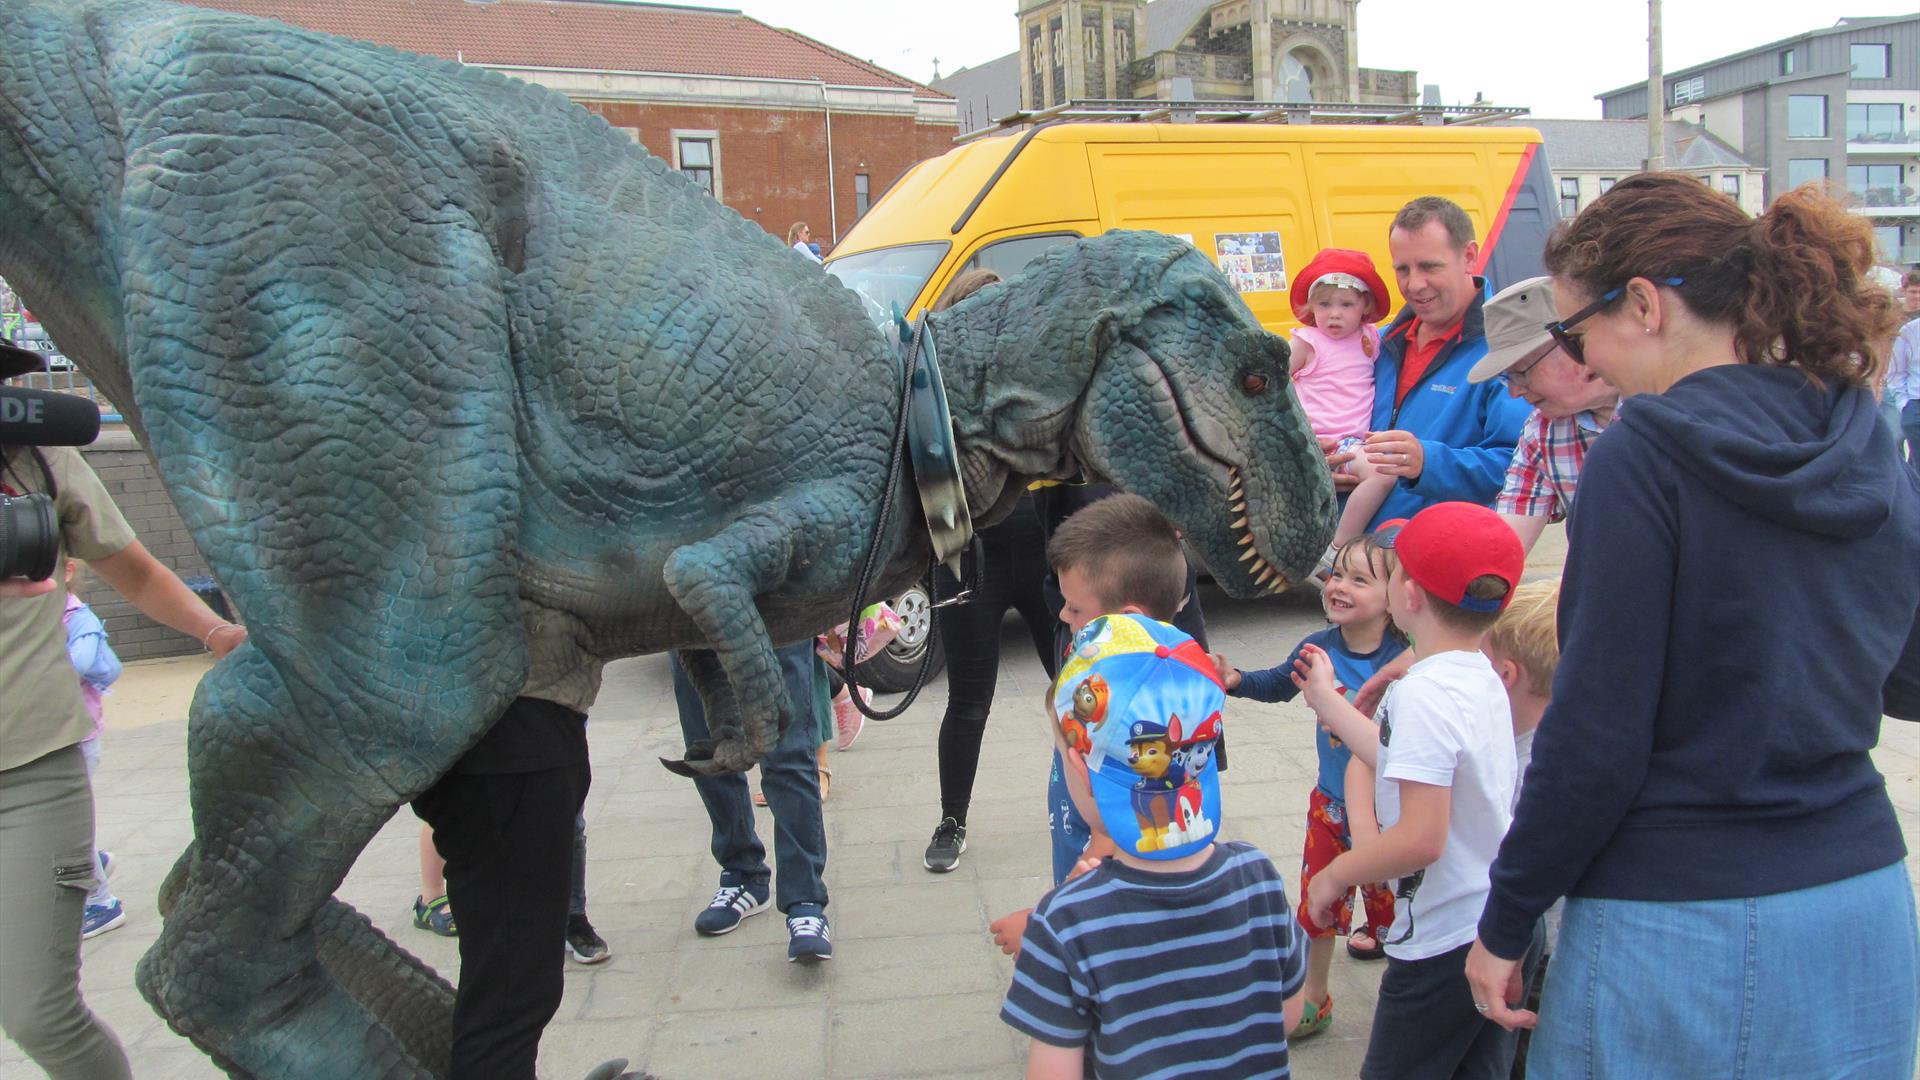 Image shows a large mechanical dinosaur with a group of children standing round it.